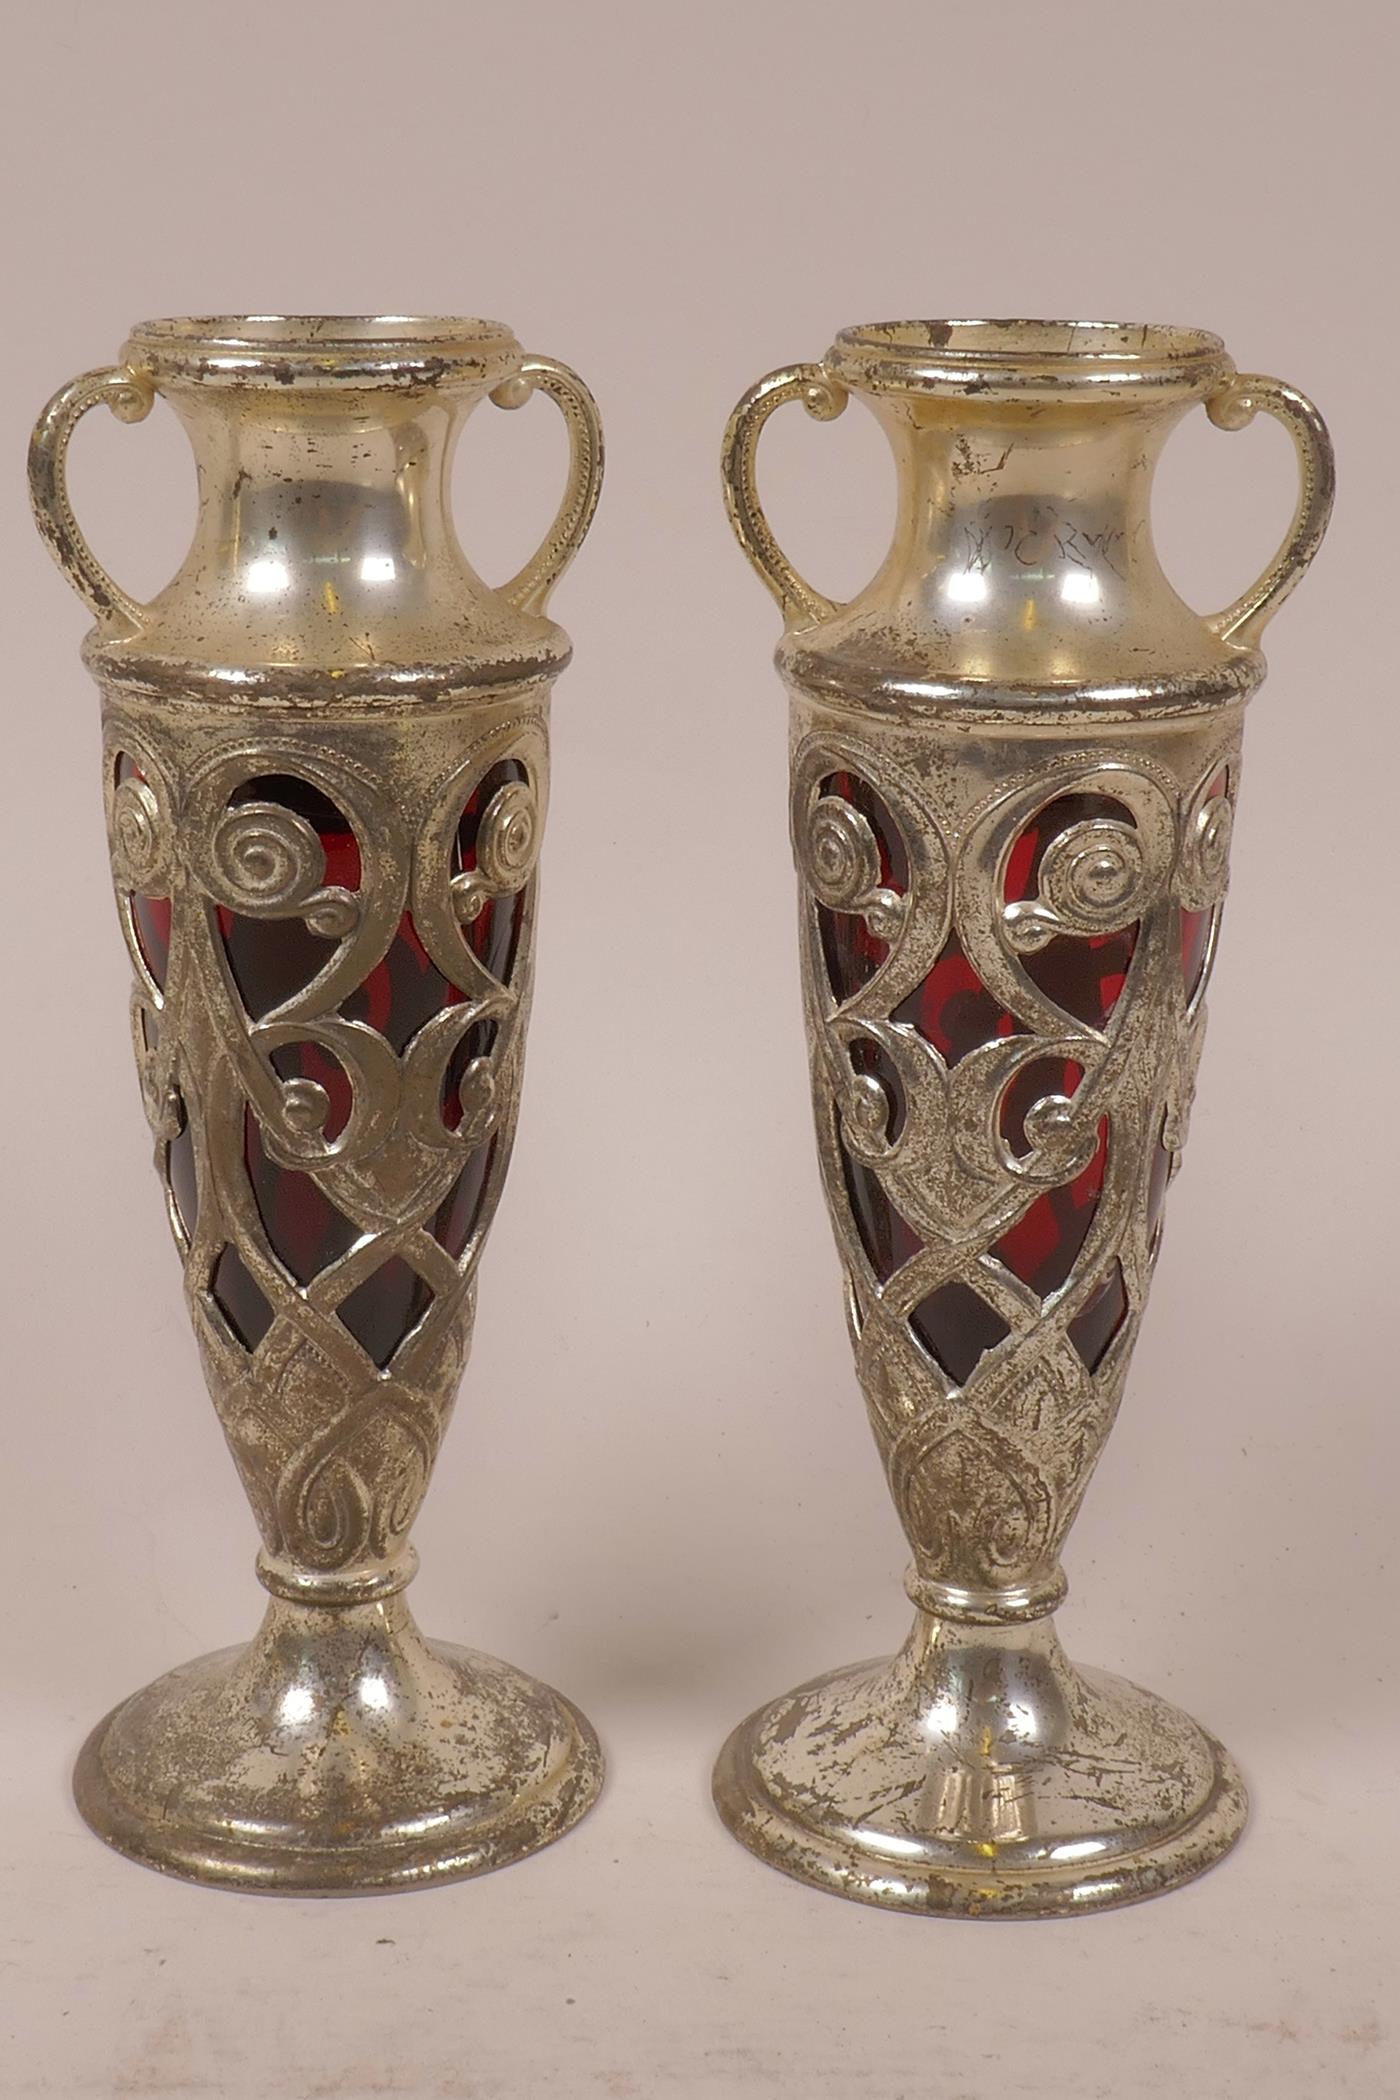 A pair of Japanese pierced plated antimony specimen vases with cranberry glass lines, 7" high